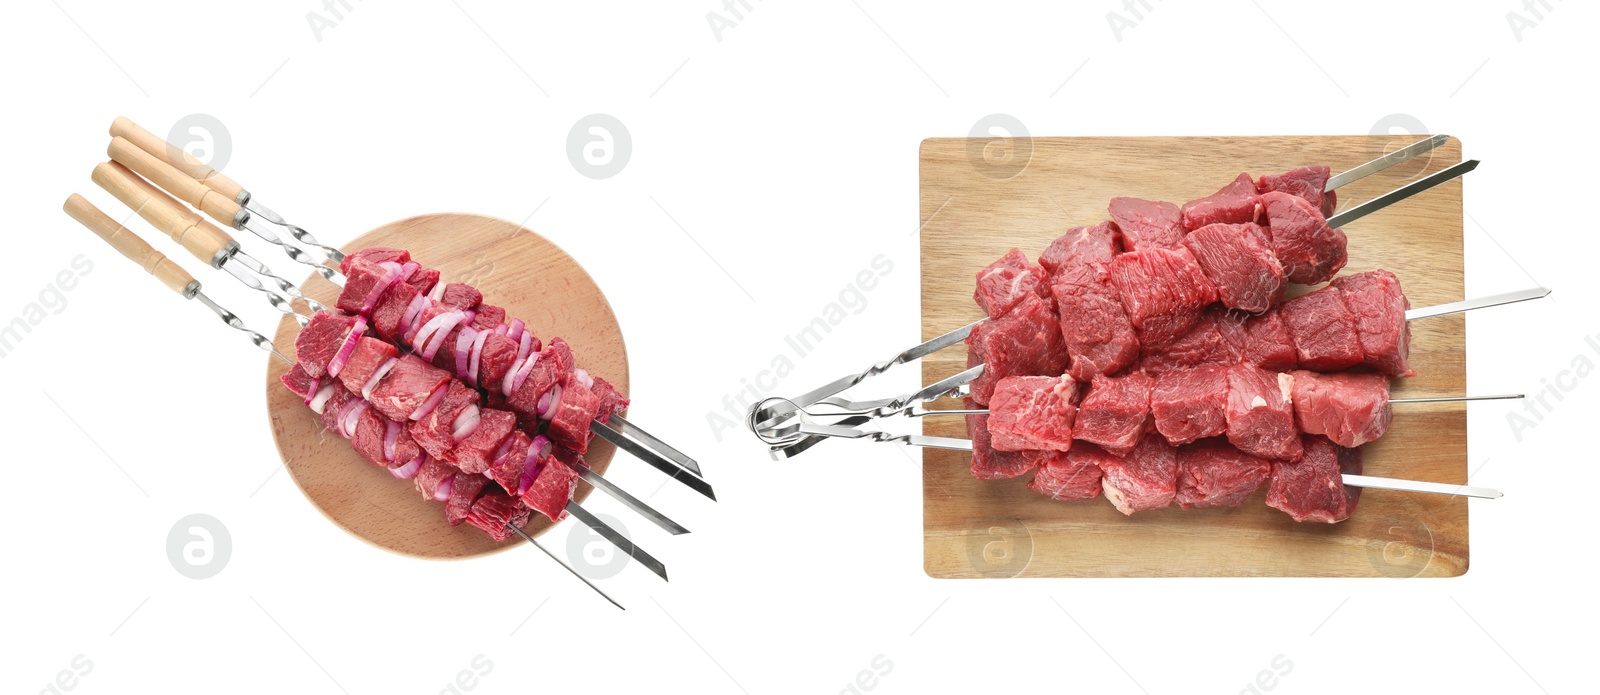 Image of Metal skewers with raw meat on white background, collage. Banner design